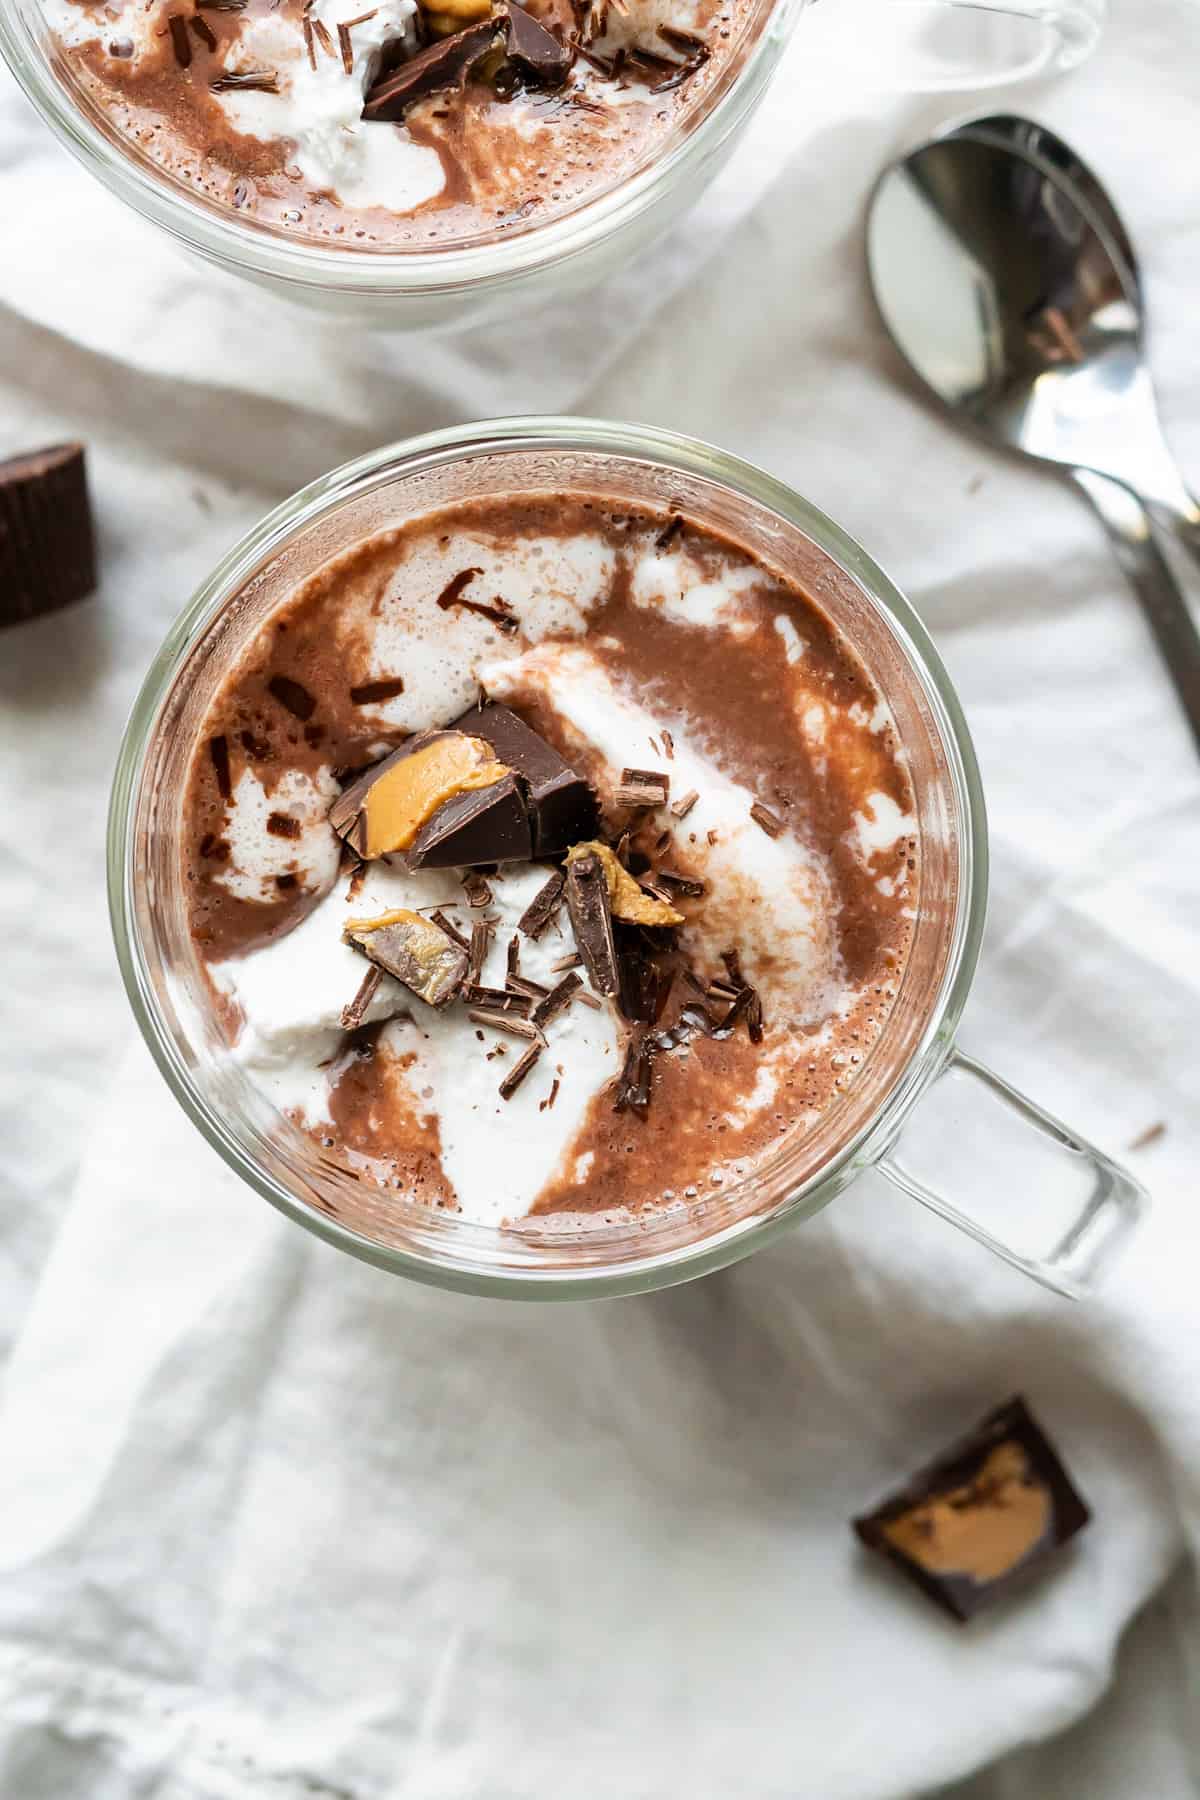 Overhead view of a mug of peanut butter hot chocolate topped with whipped cream, chocolate shavings, and a chopped peanut butter cup.